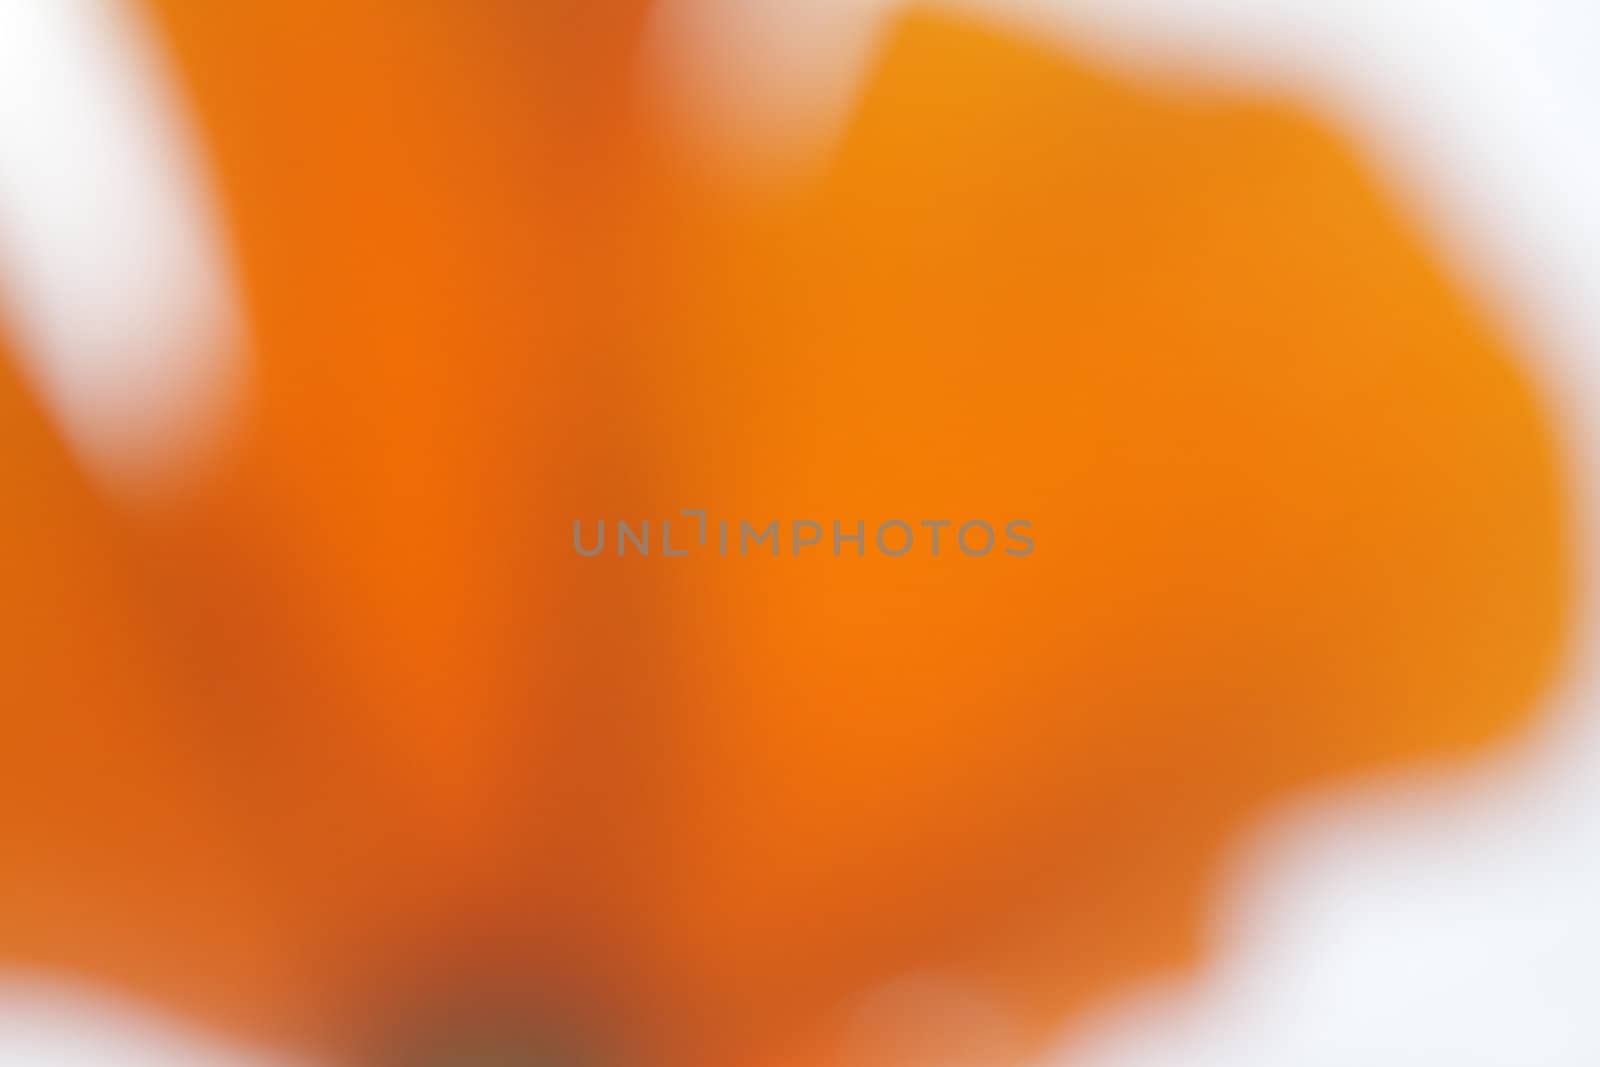 Abstract shape formed by bright orange flower